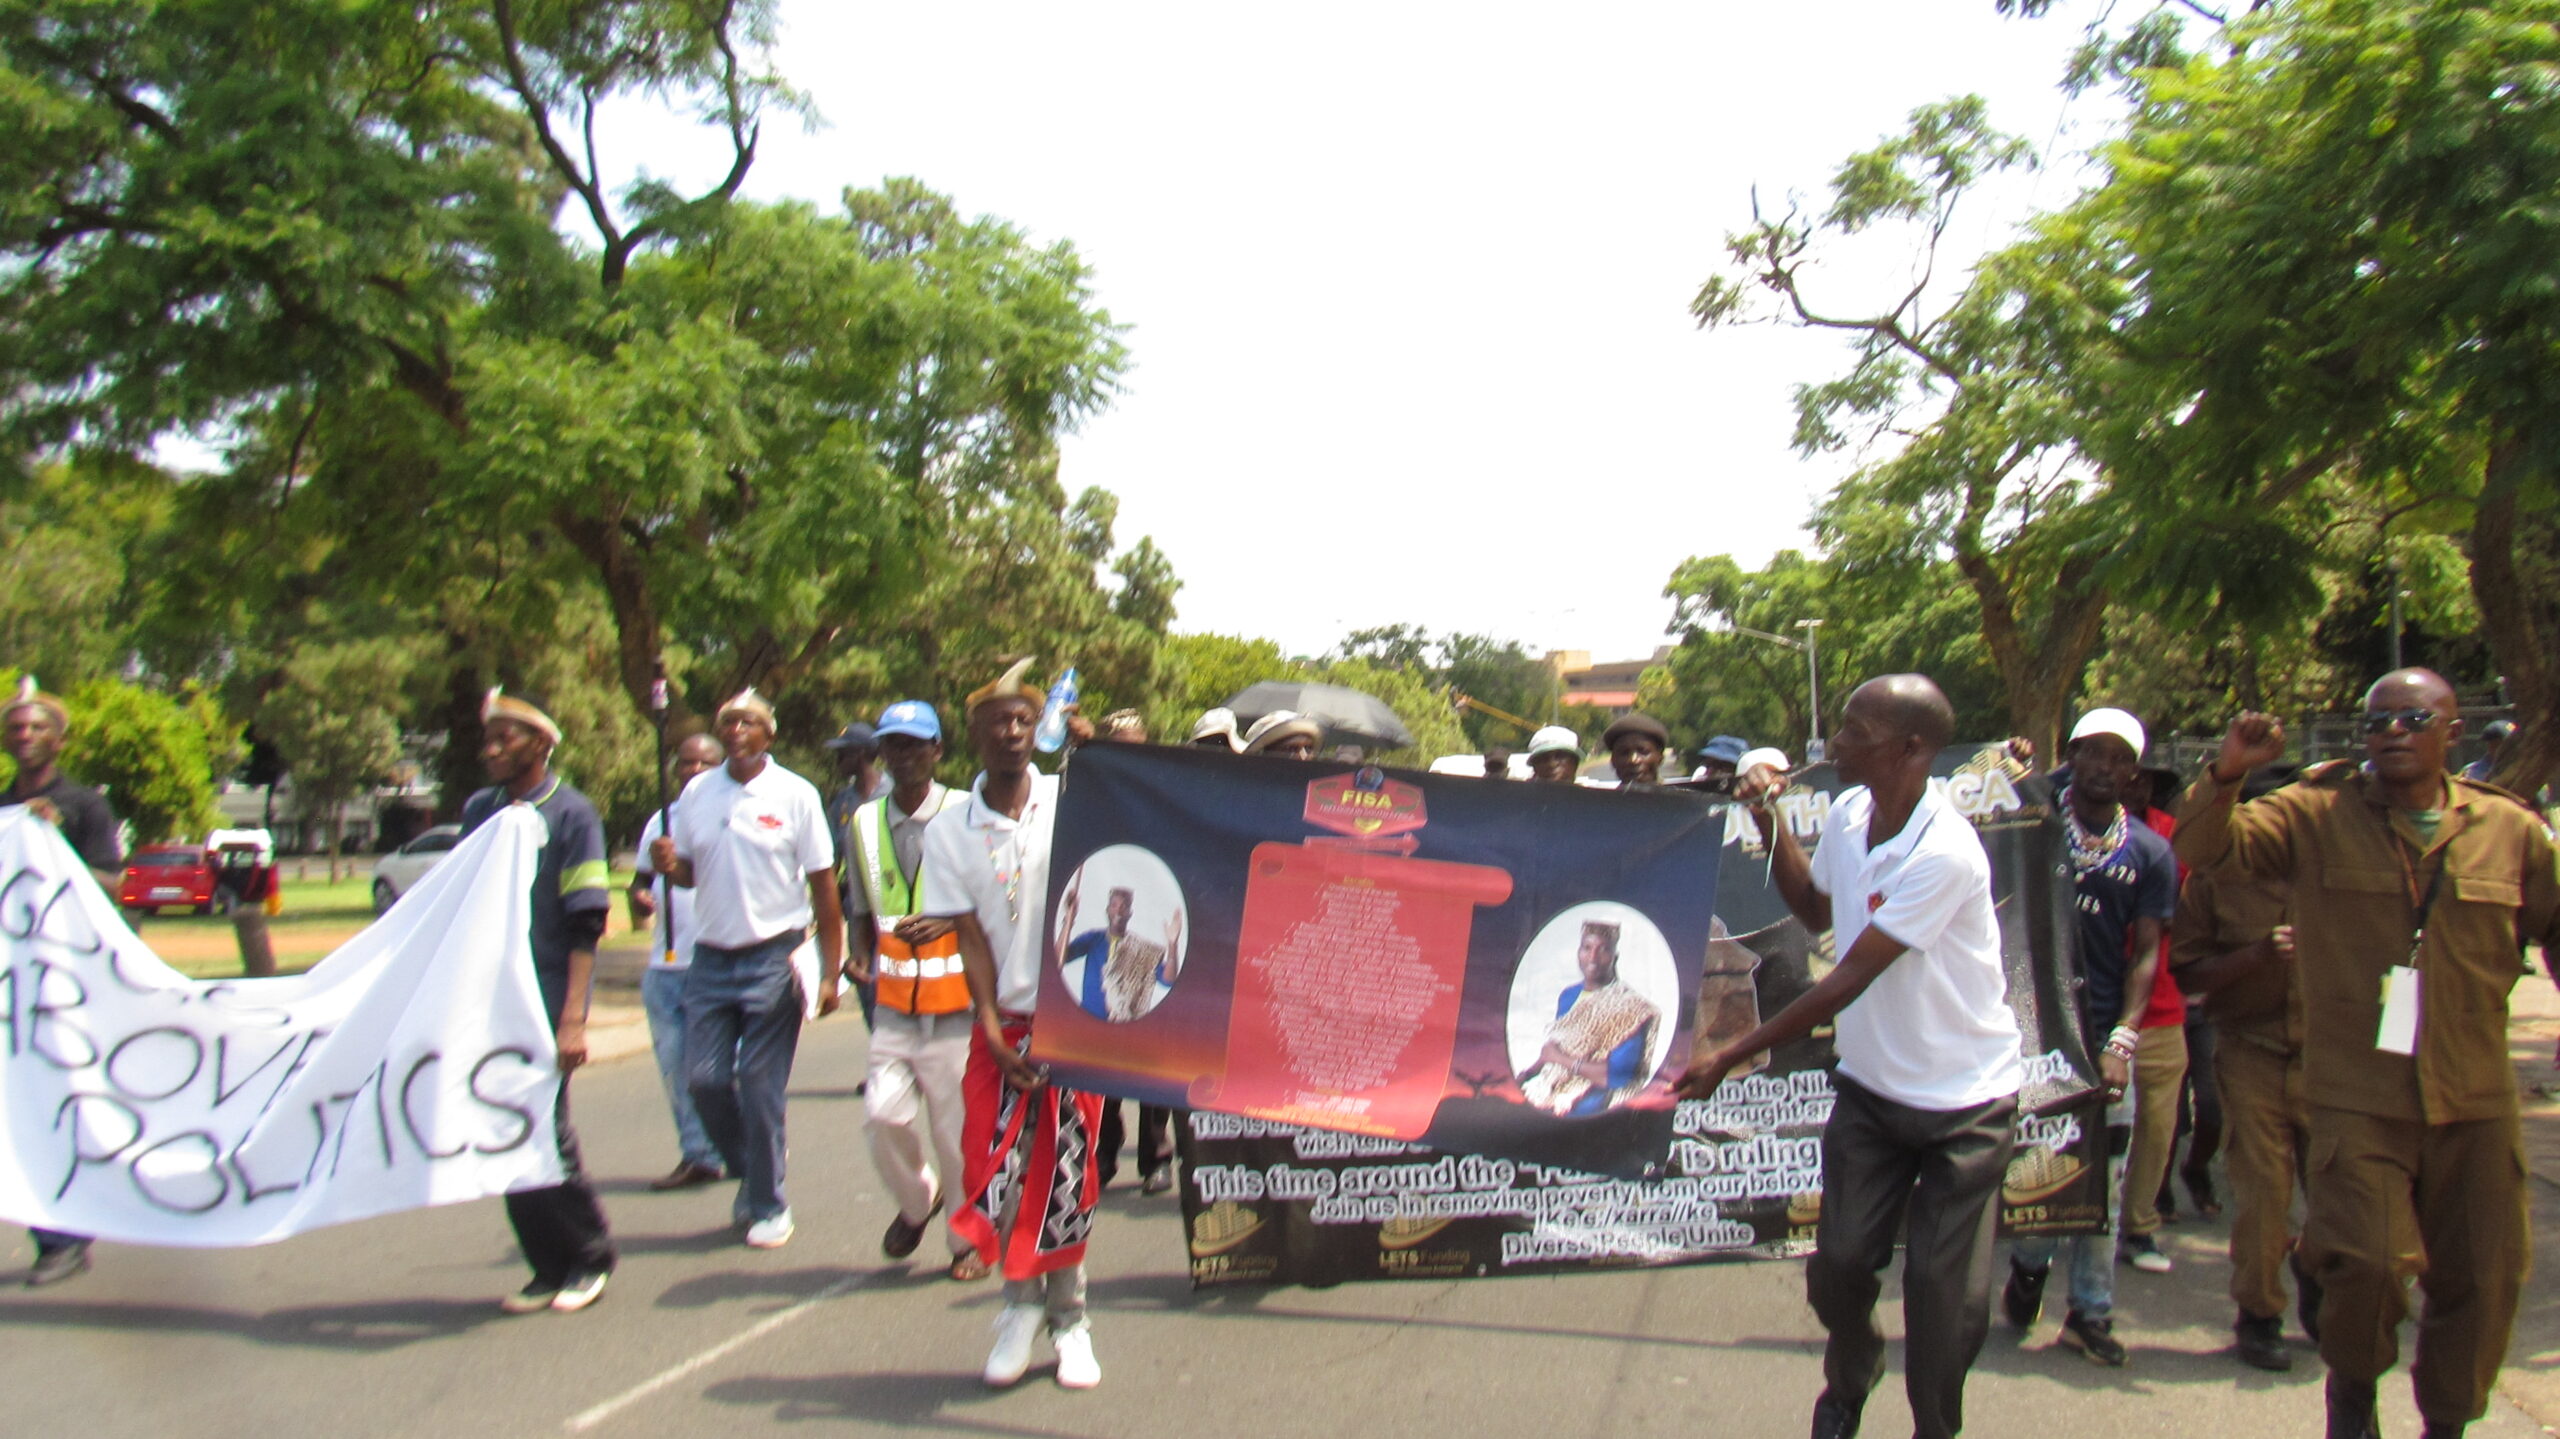 Traditional leaders march to Union Buildings to for better lives for South African photo by Dimakatso Modipa